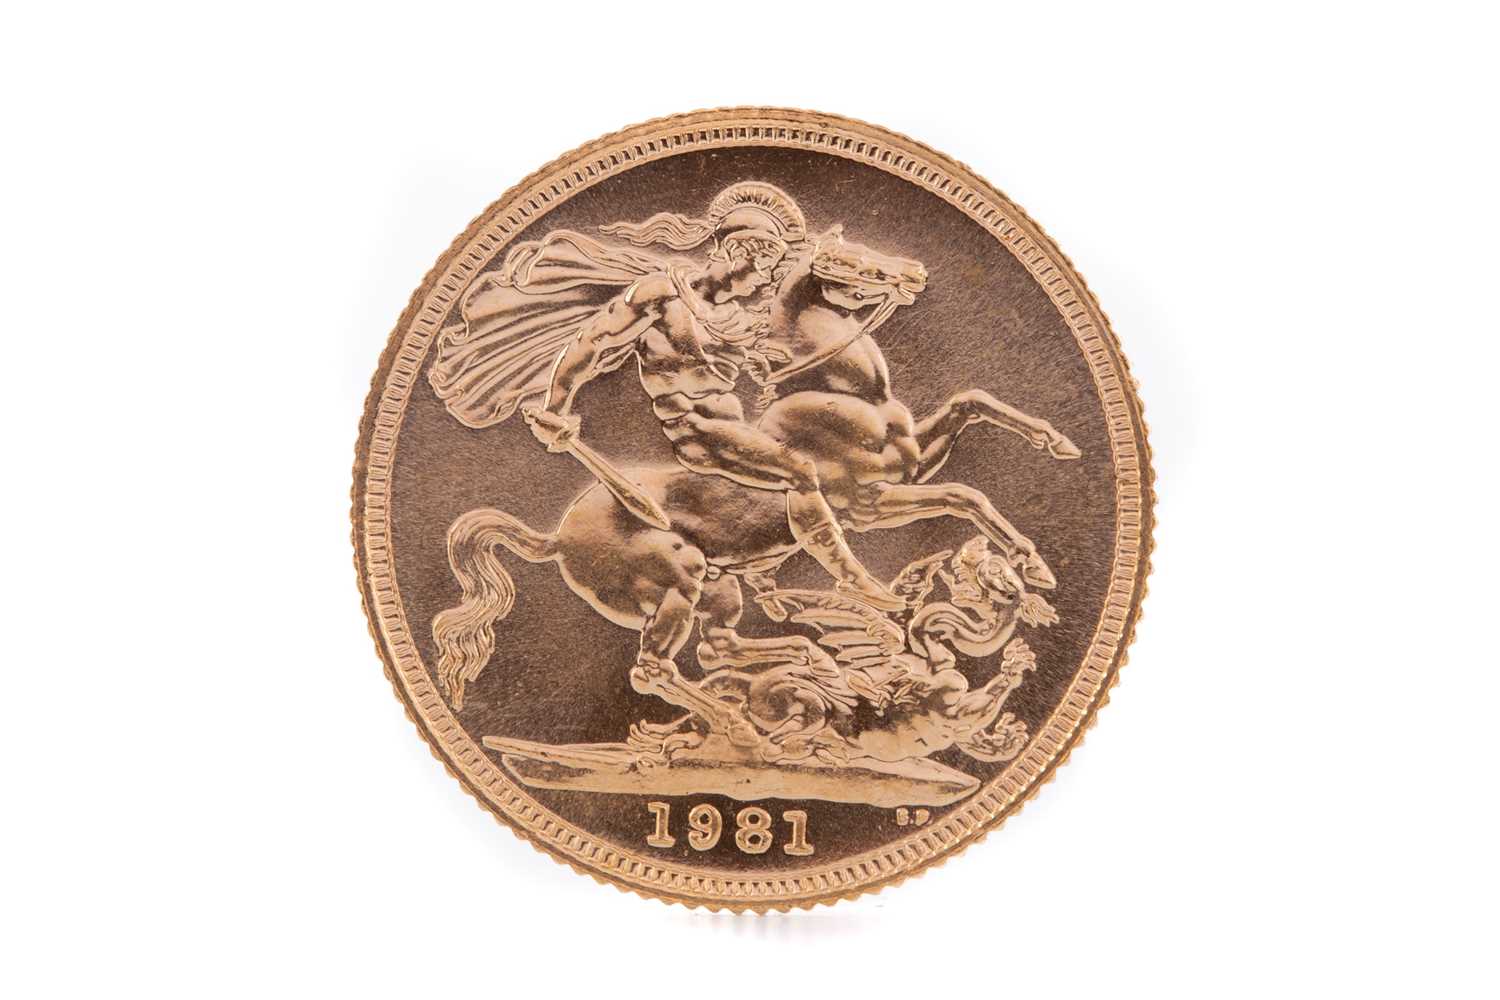 Lot 100 - AN ELIZABETH II GOLD SOVEREIGN DATED 1981